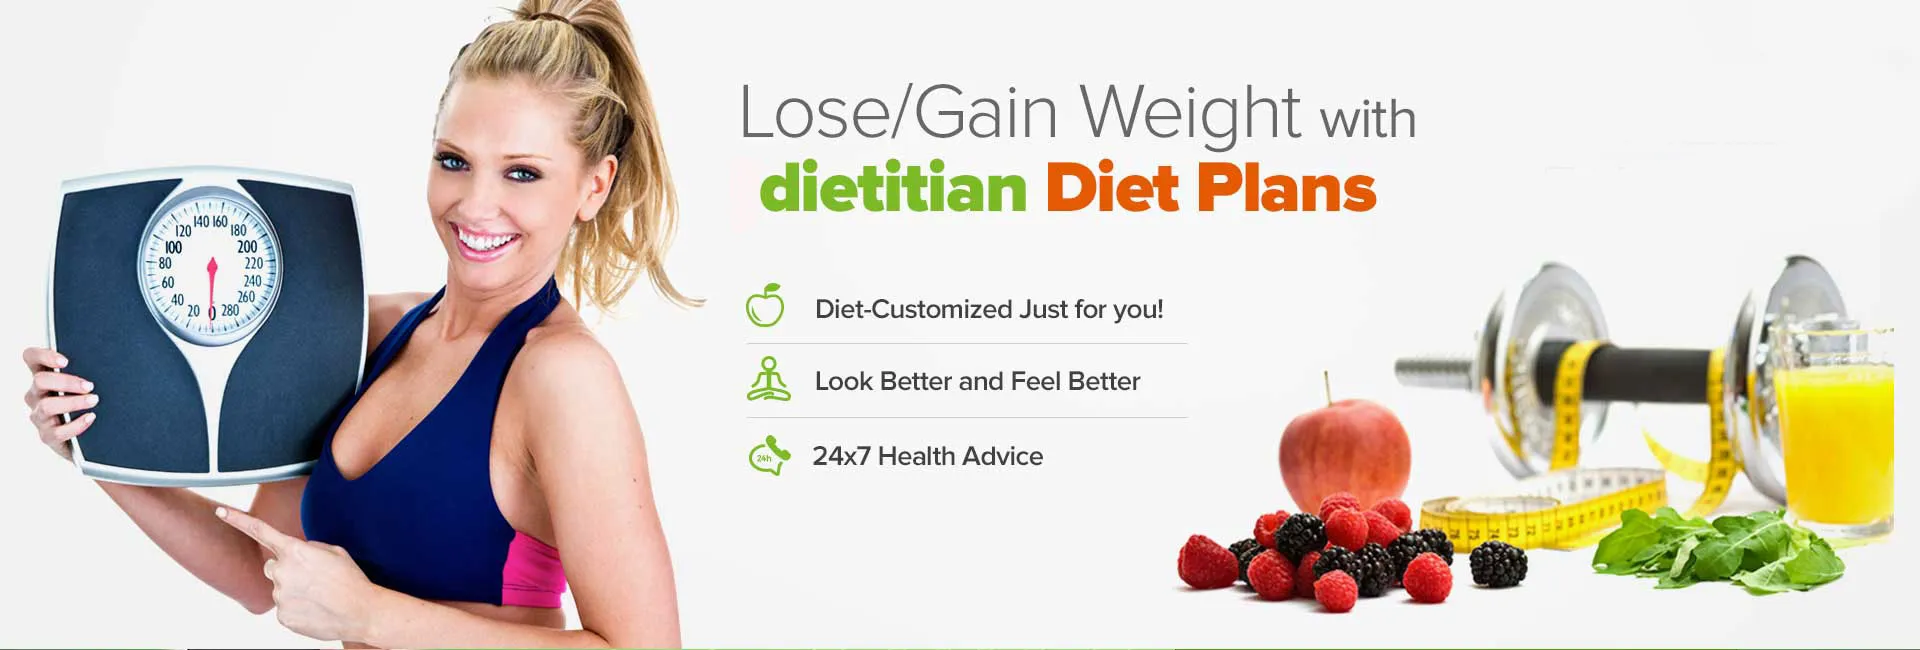 Diet Plan For Weight Loss In London